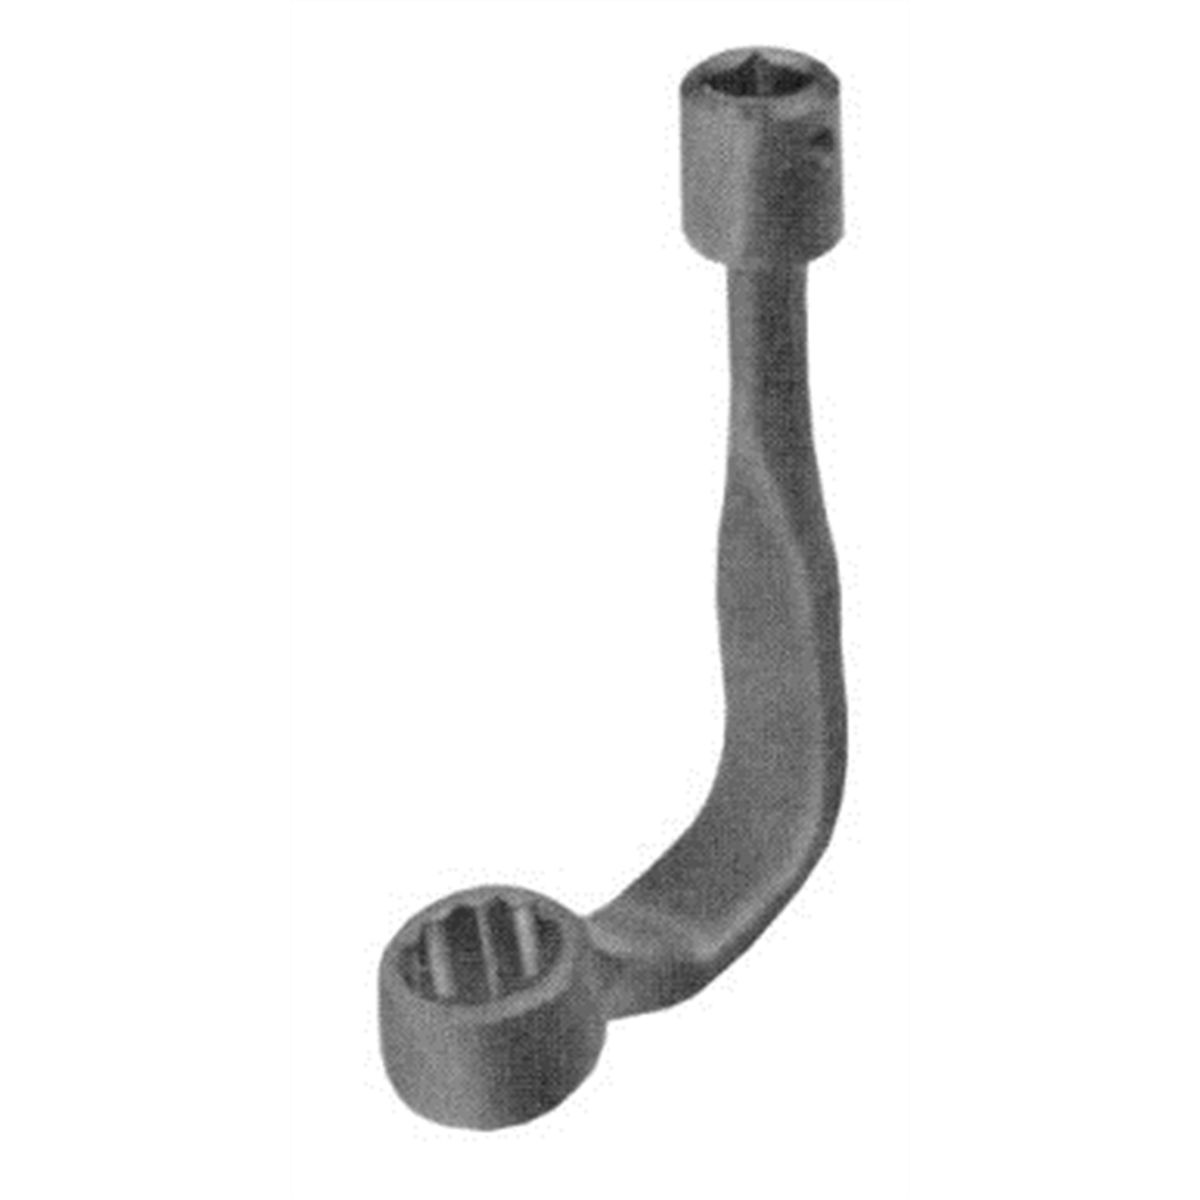 Upper Arm Alignment Wrench - 22 mm Hex